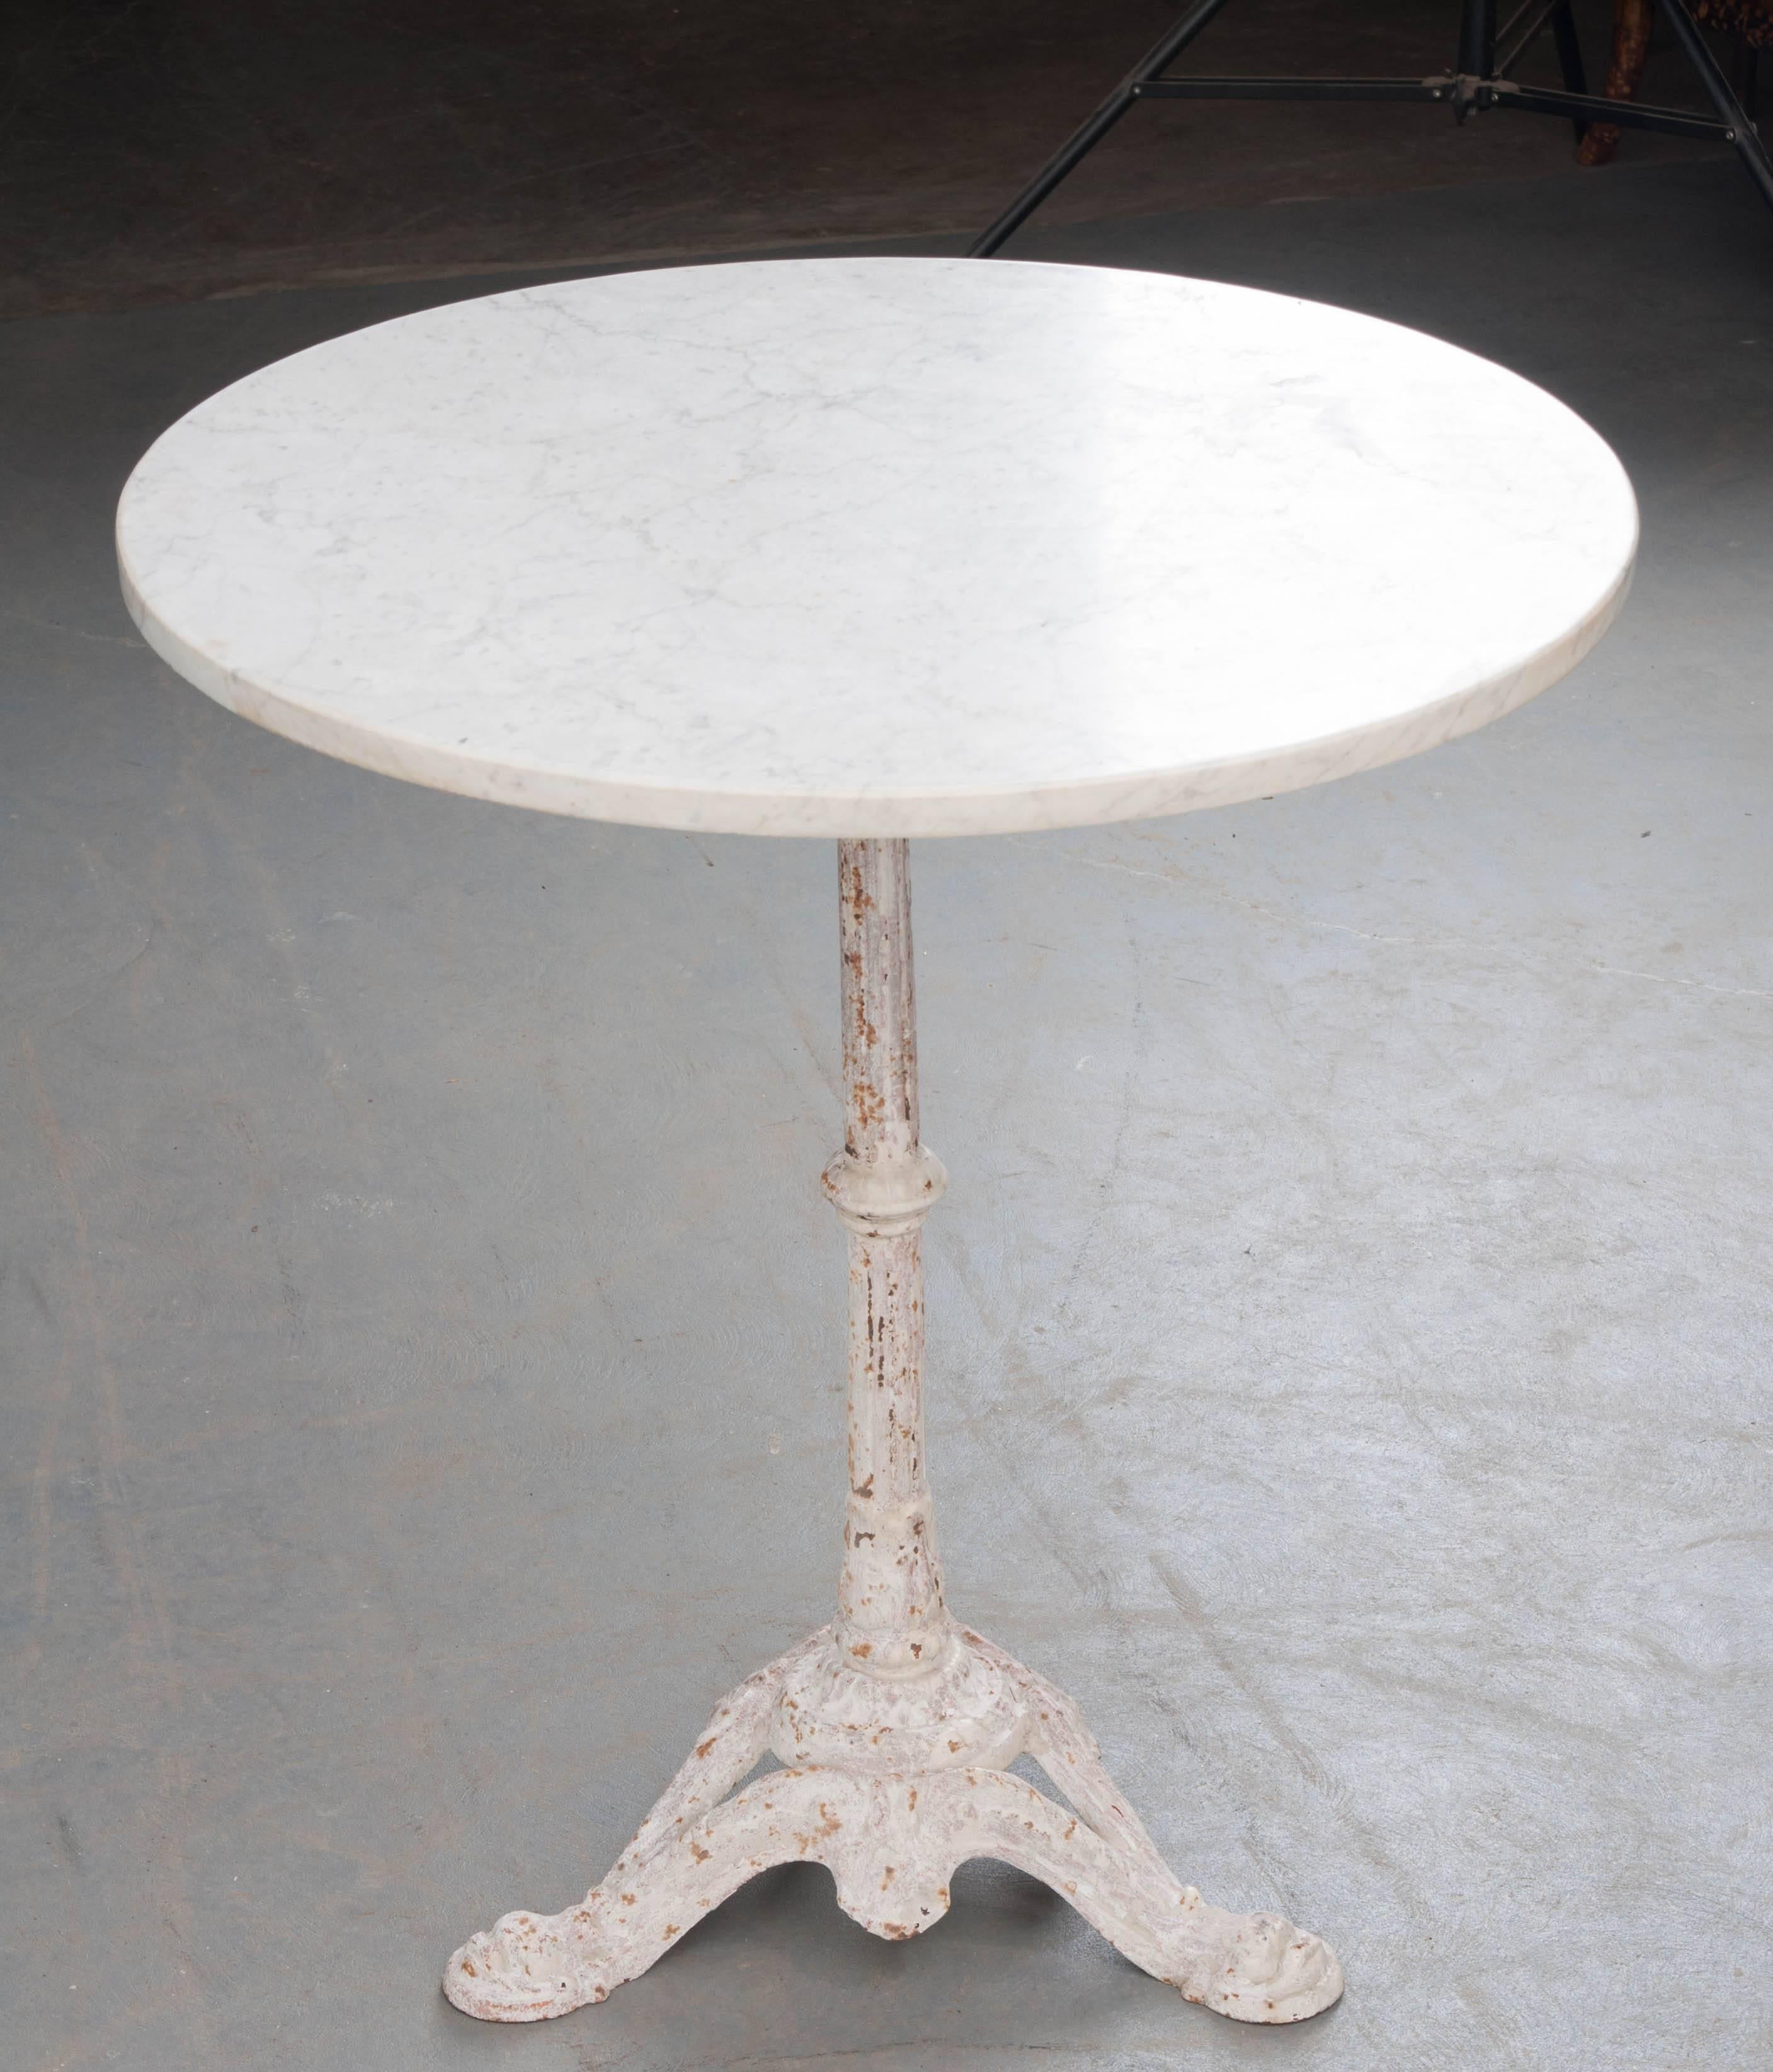 A round 19th century painted iron and marble bistro table from France. The styled iron tripod base supports the weighty top while providing decorative elements that add to the table's overall charm. The white, round marble top is in excellent